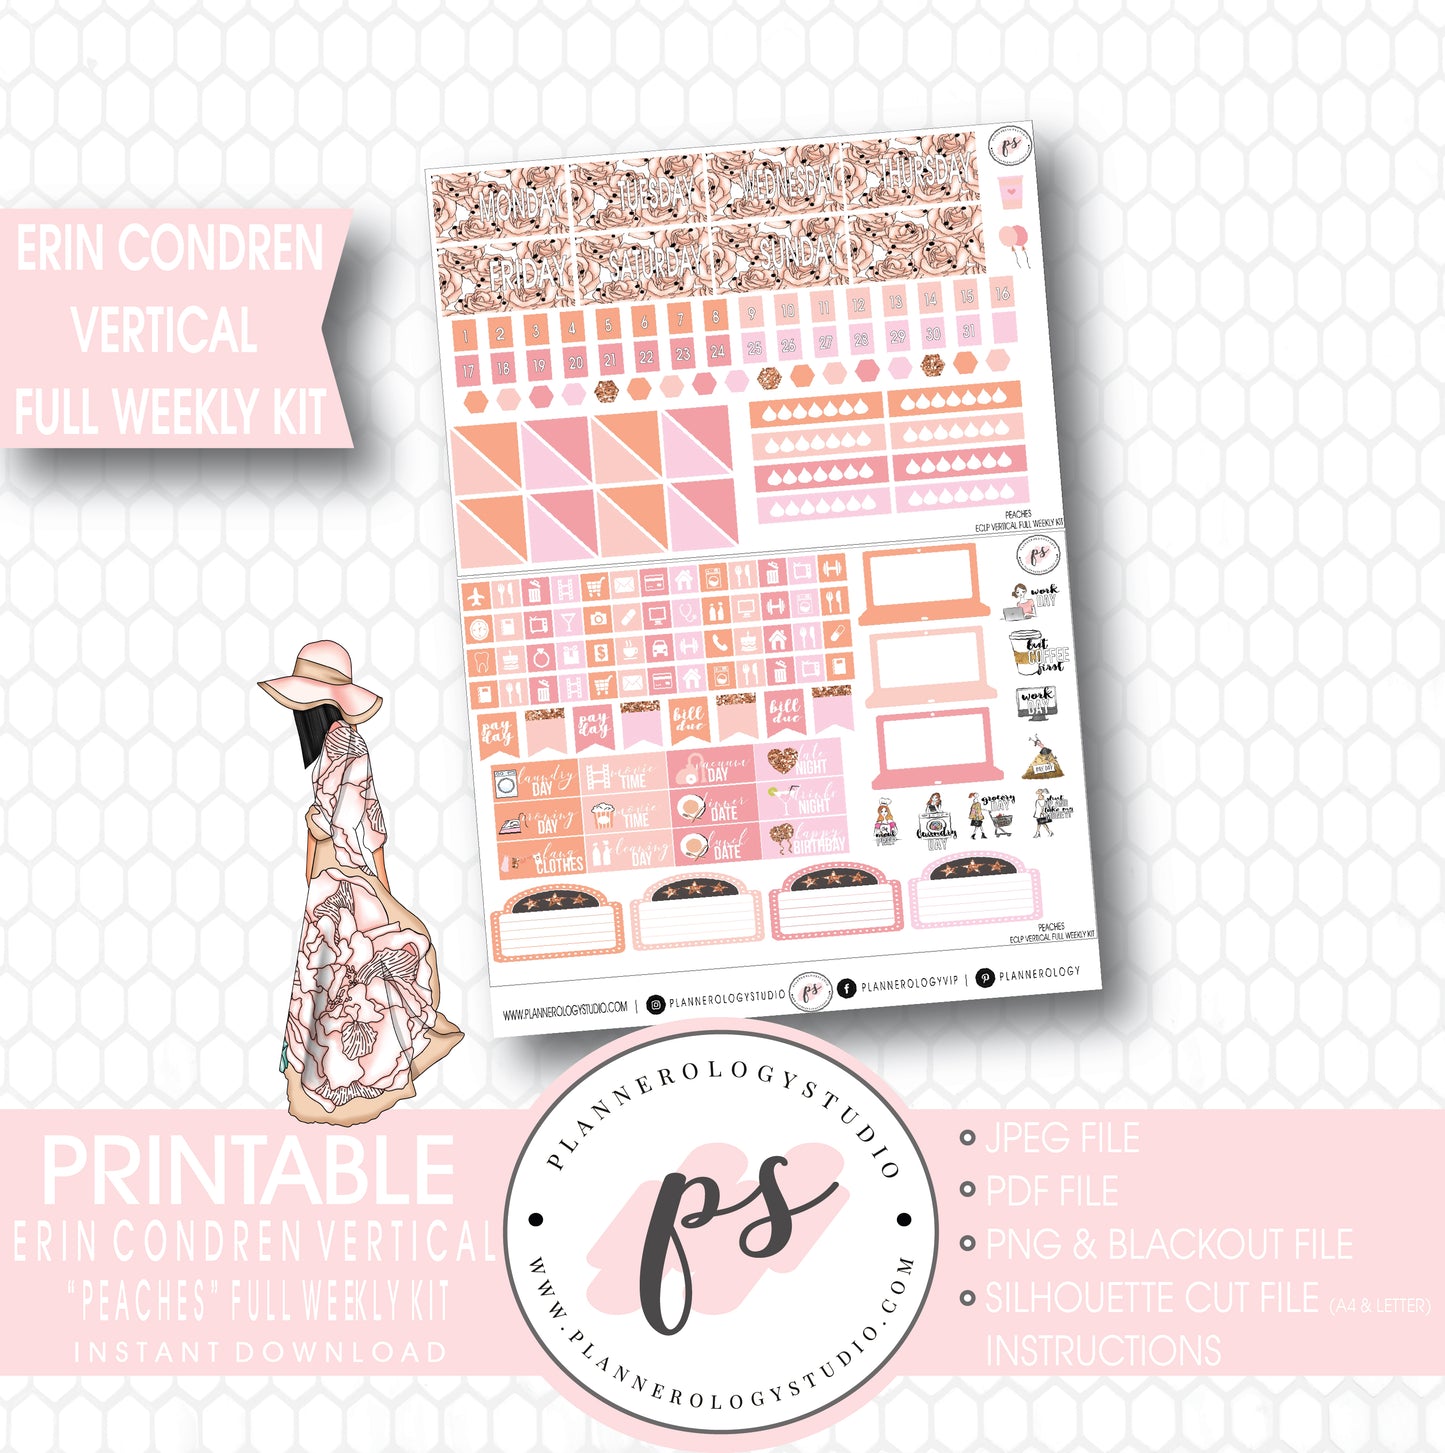 Peaches Full Weekly Kit Printable Planner Stickers (for use with ECLP Vertical) - Plannerologystudio